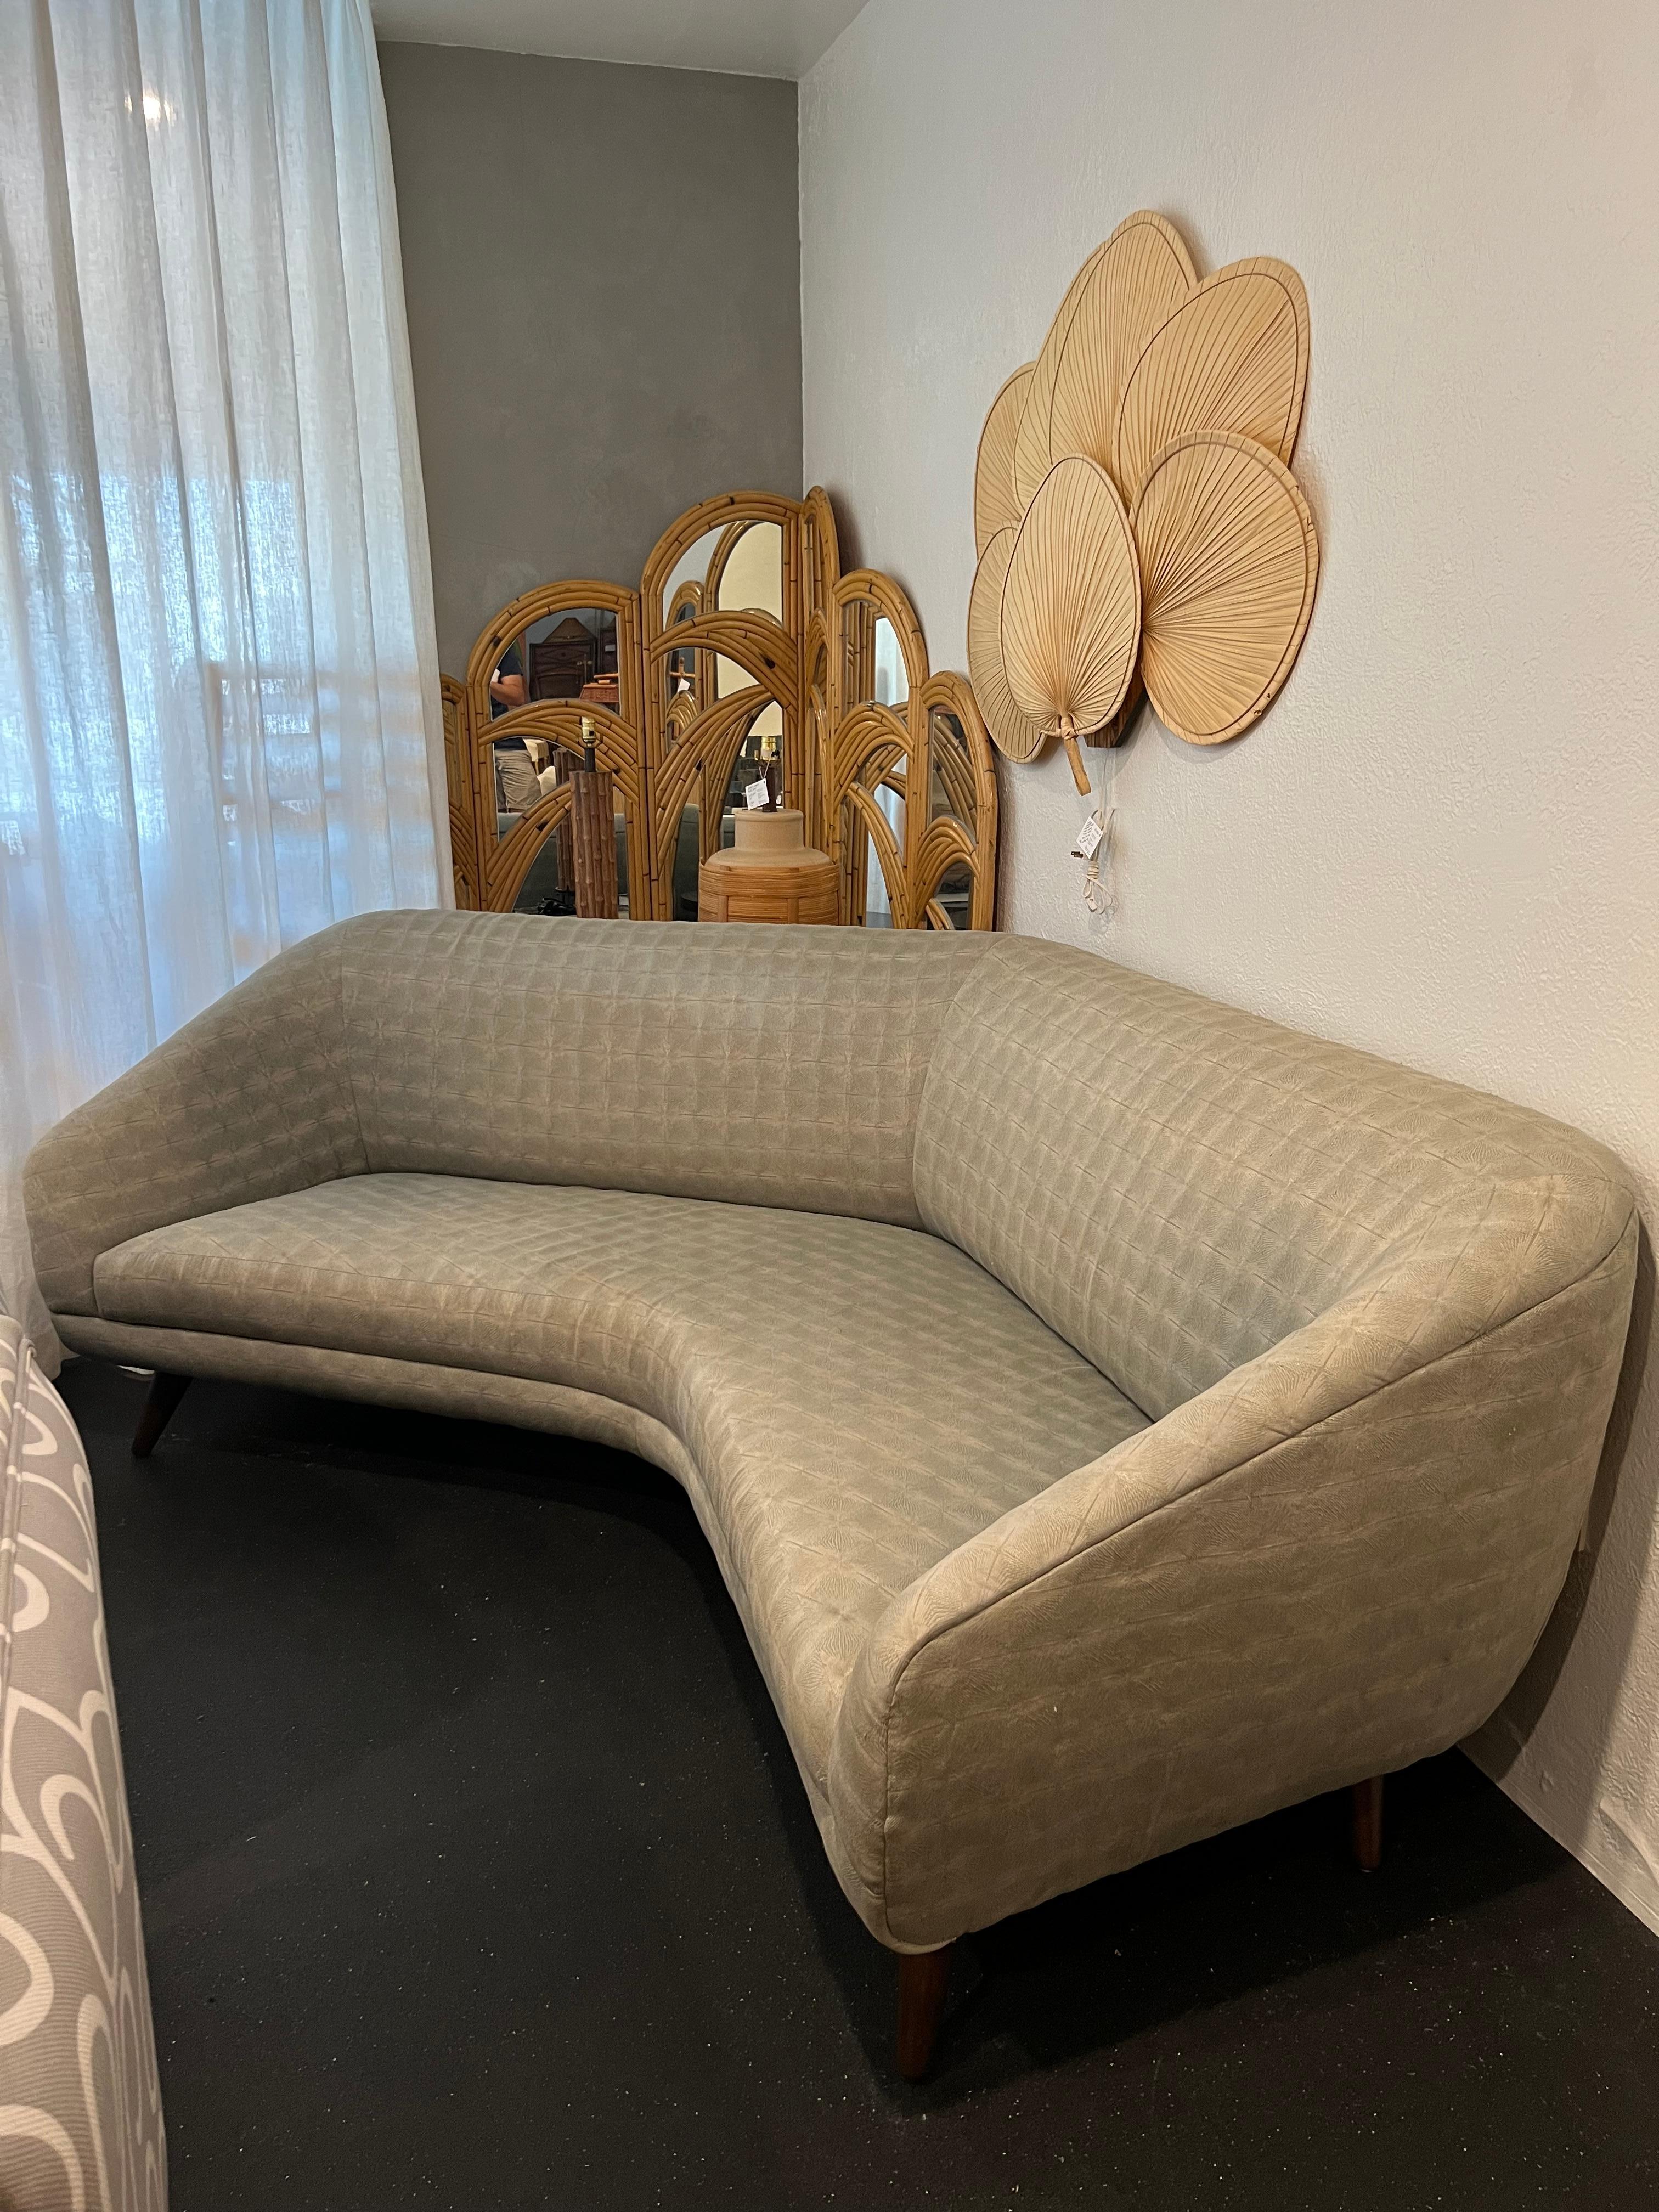 Rare Vladimir Kagan for Weiman/Preview angular sofa. Label intact and receipt from original purchase in hand. Fabric has been professionally cleaned however reupholstery is strongly recommended. Legs are finished in a dark walnut. Additional photos